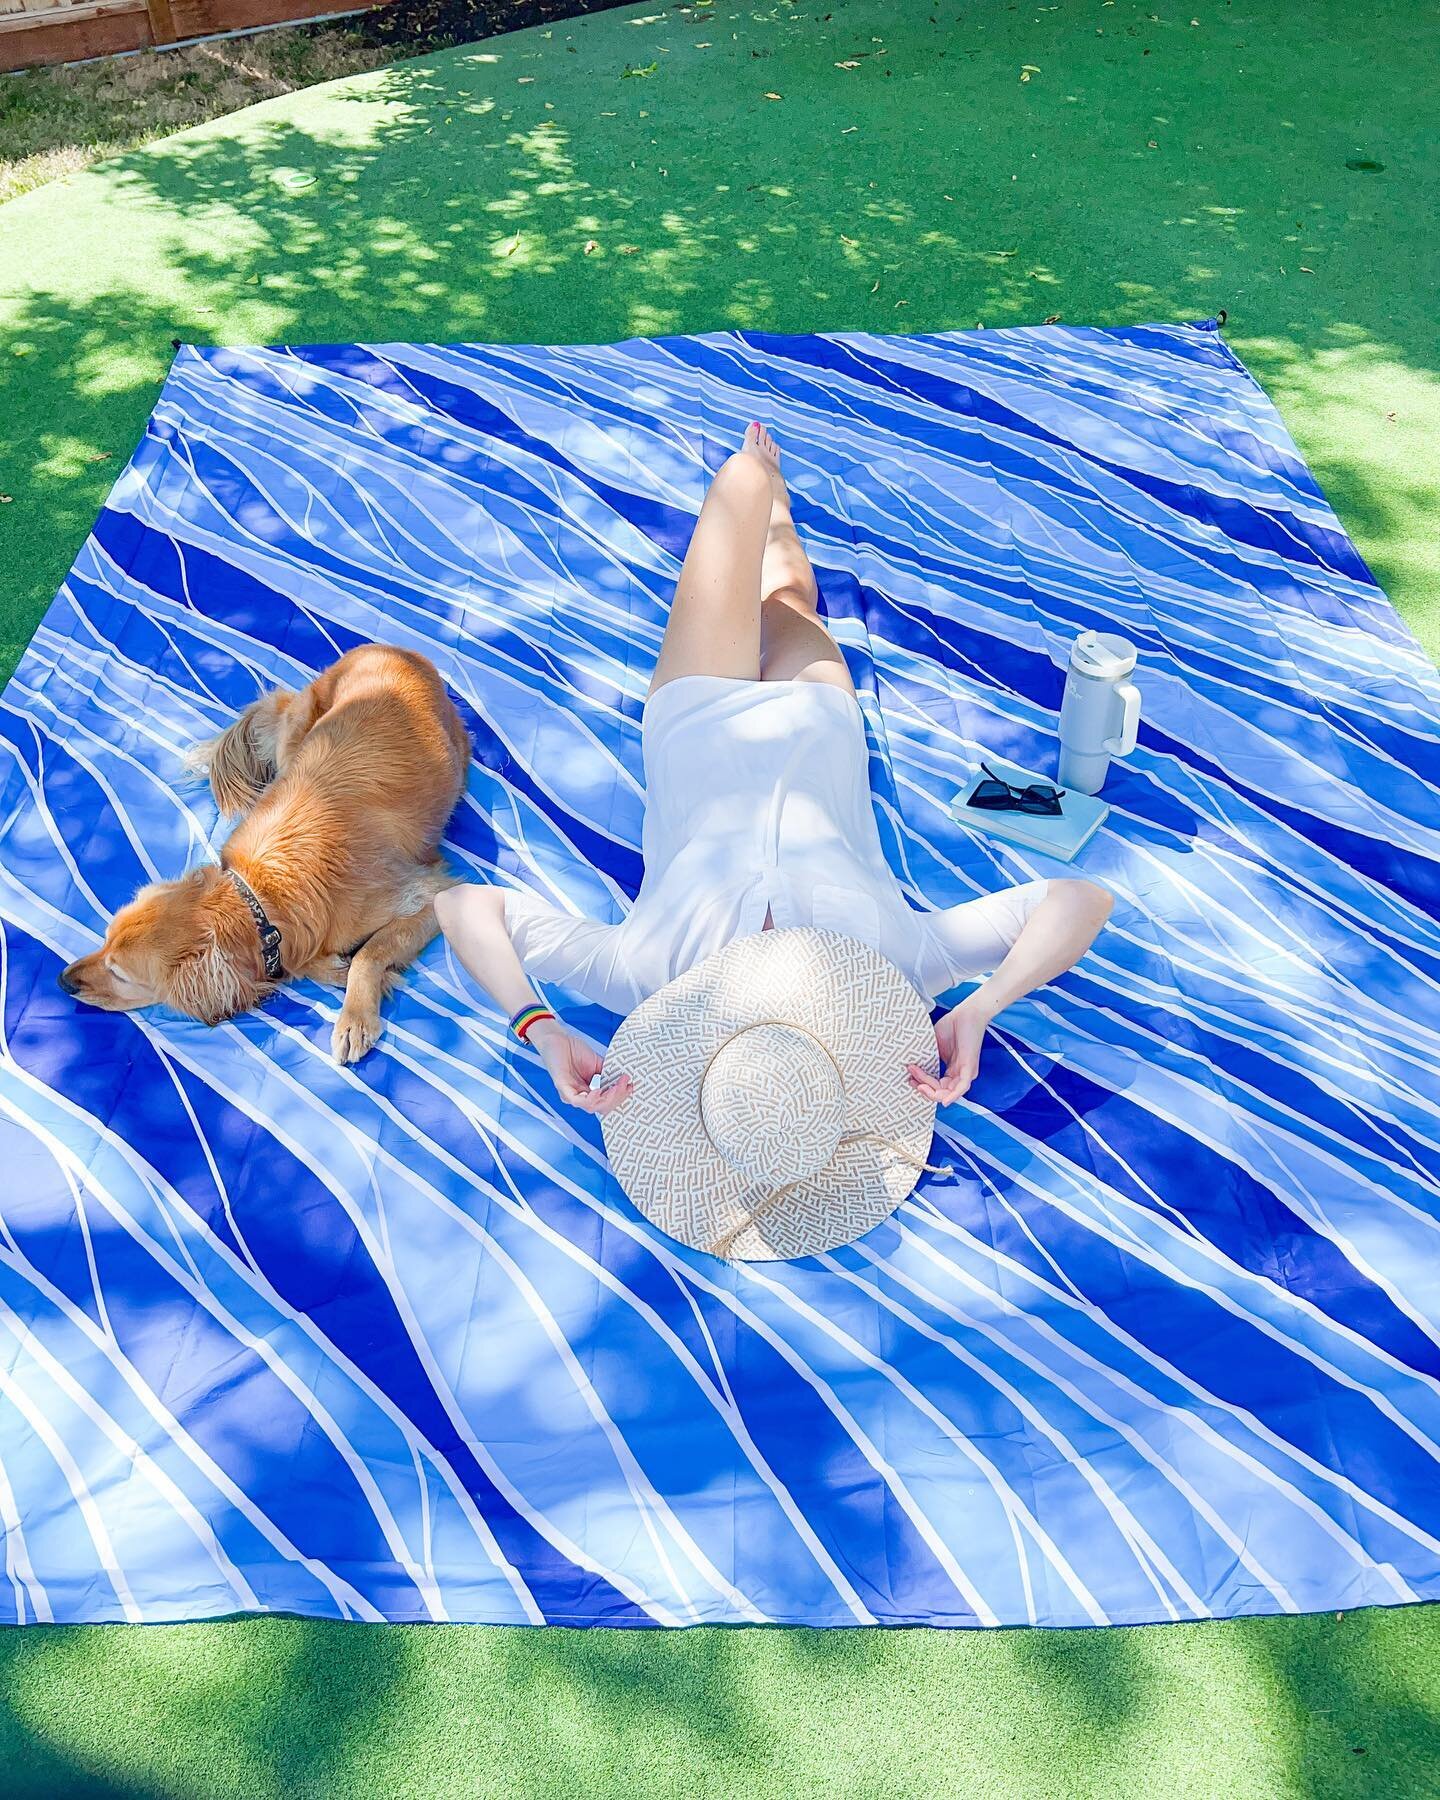 This @everlasting_comfort beach blanket is a must have for summer! Ad

Lightweight, waterproof, sand resistant, large enough to fit 10 people (or pups 😉🦮and easy to travel with! (It comes with its own carrying case!)

It also features pockets on th